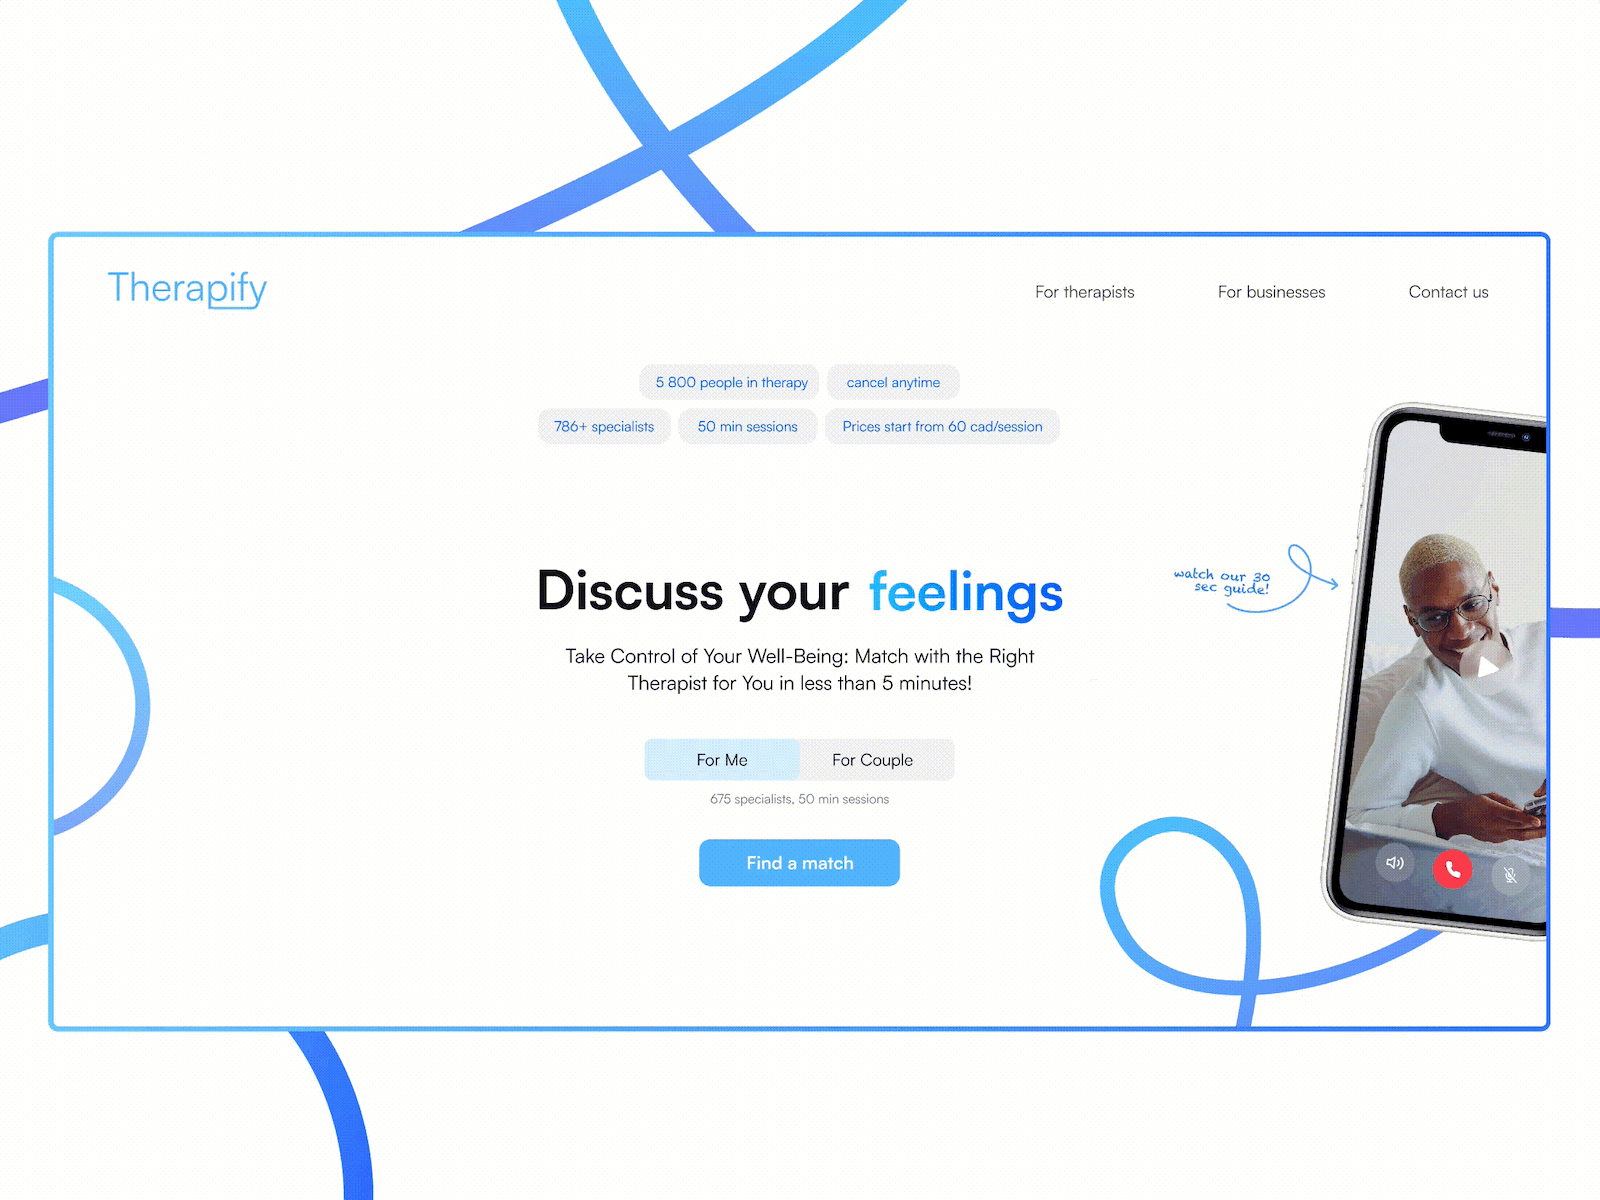 Online Therapy Website